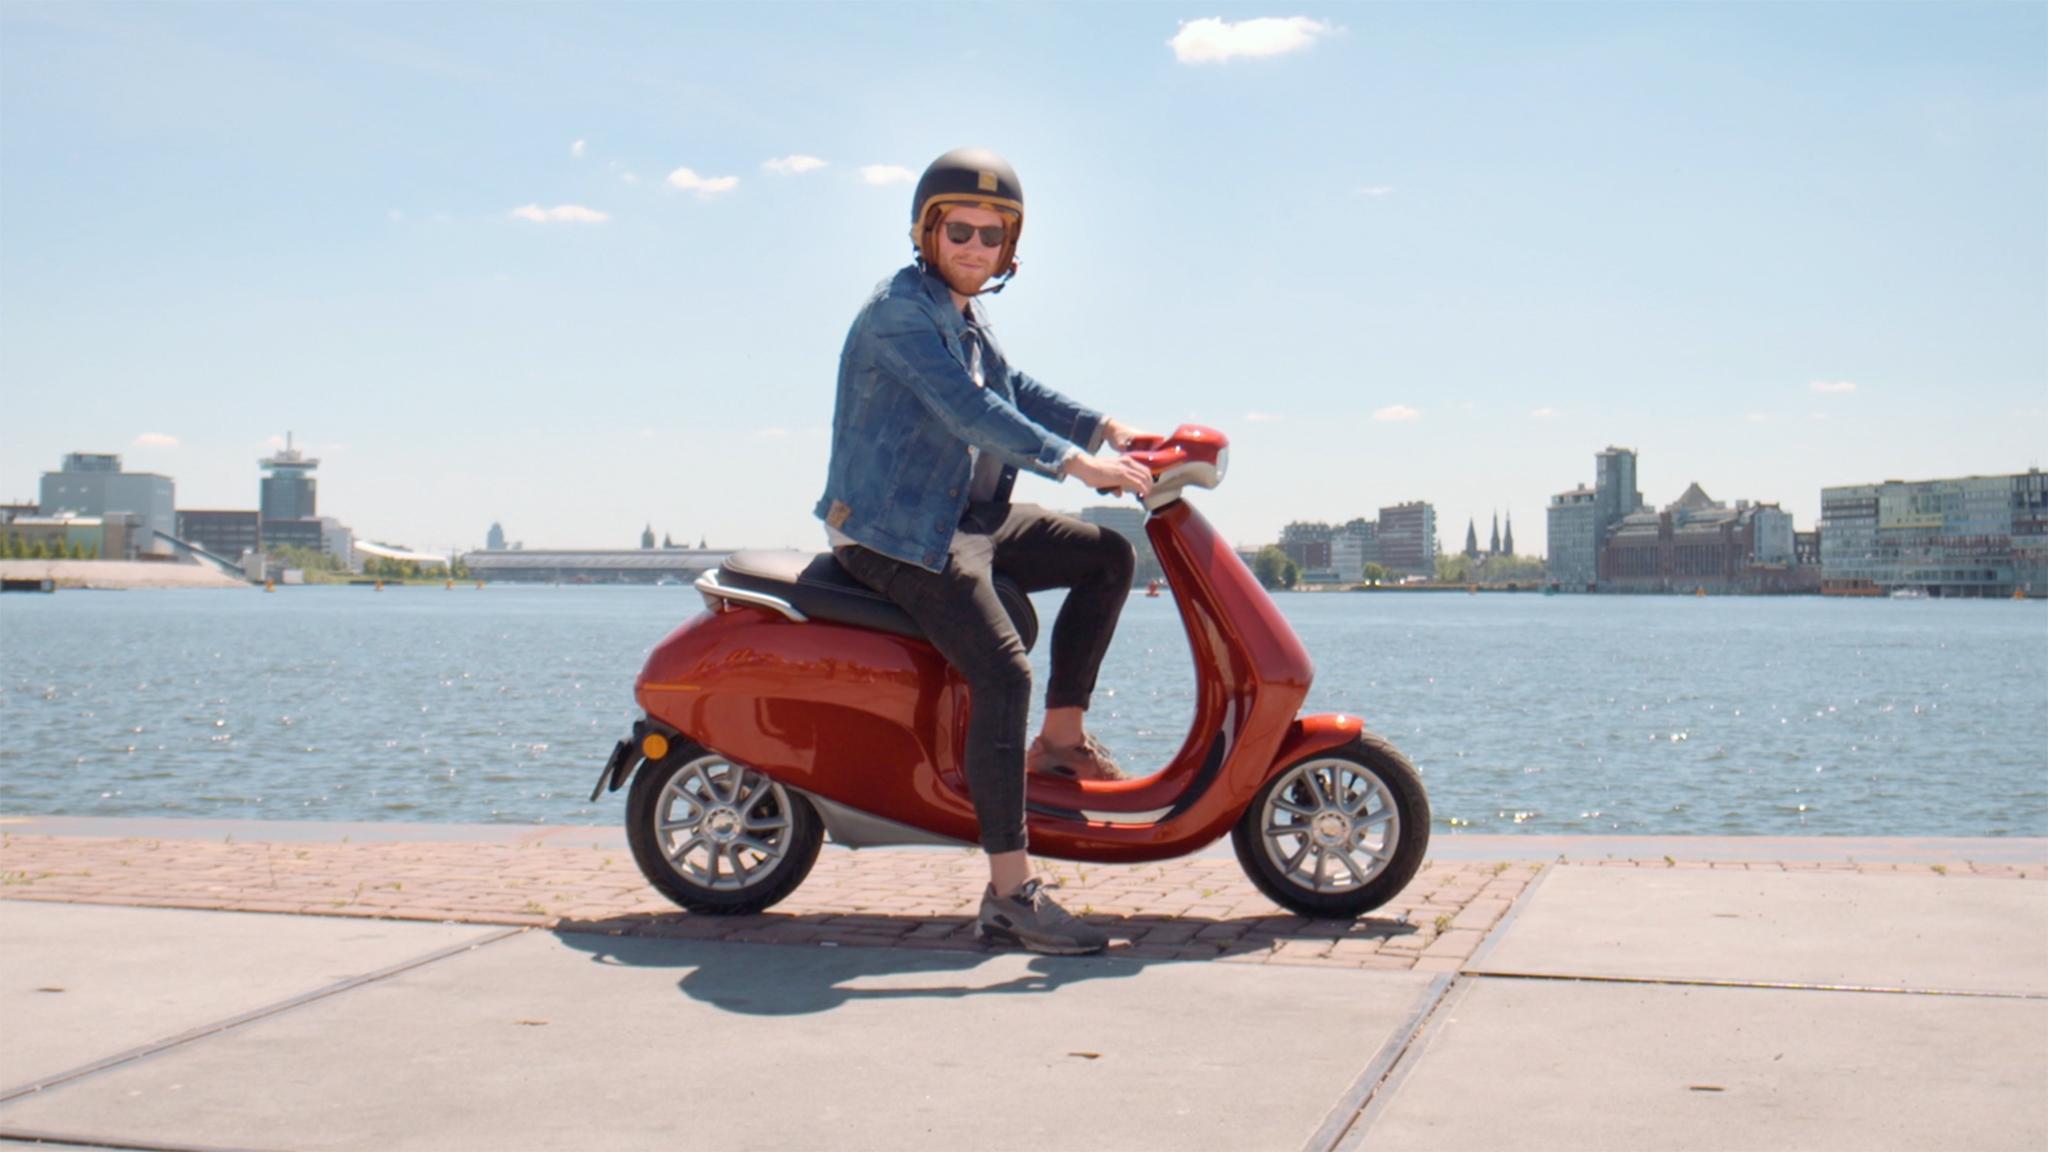 AppScooter can travel up to 245 miles (400km) on a single charge